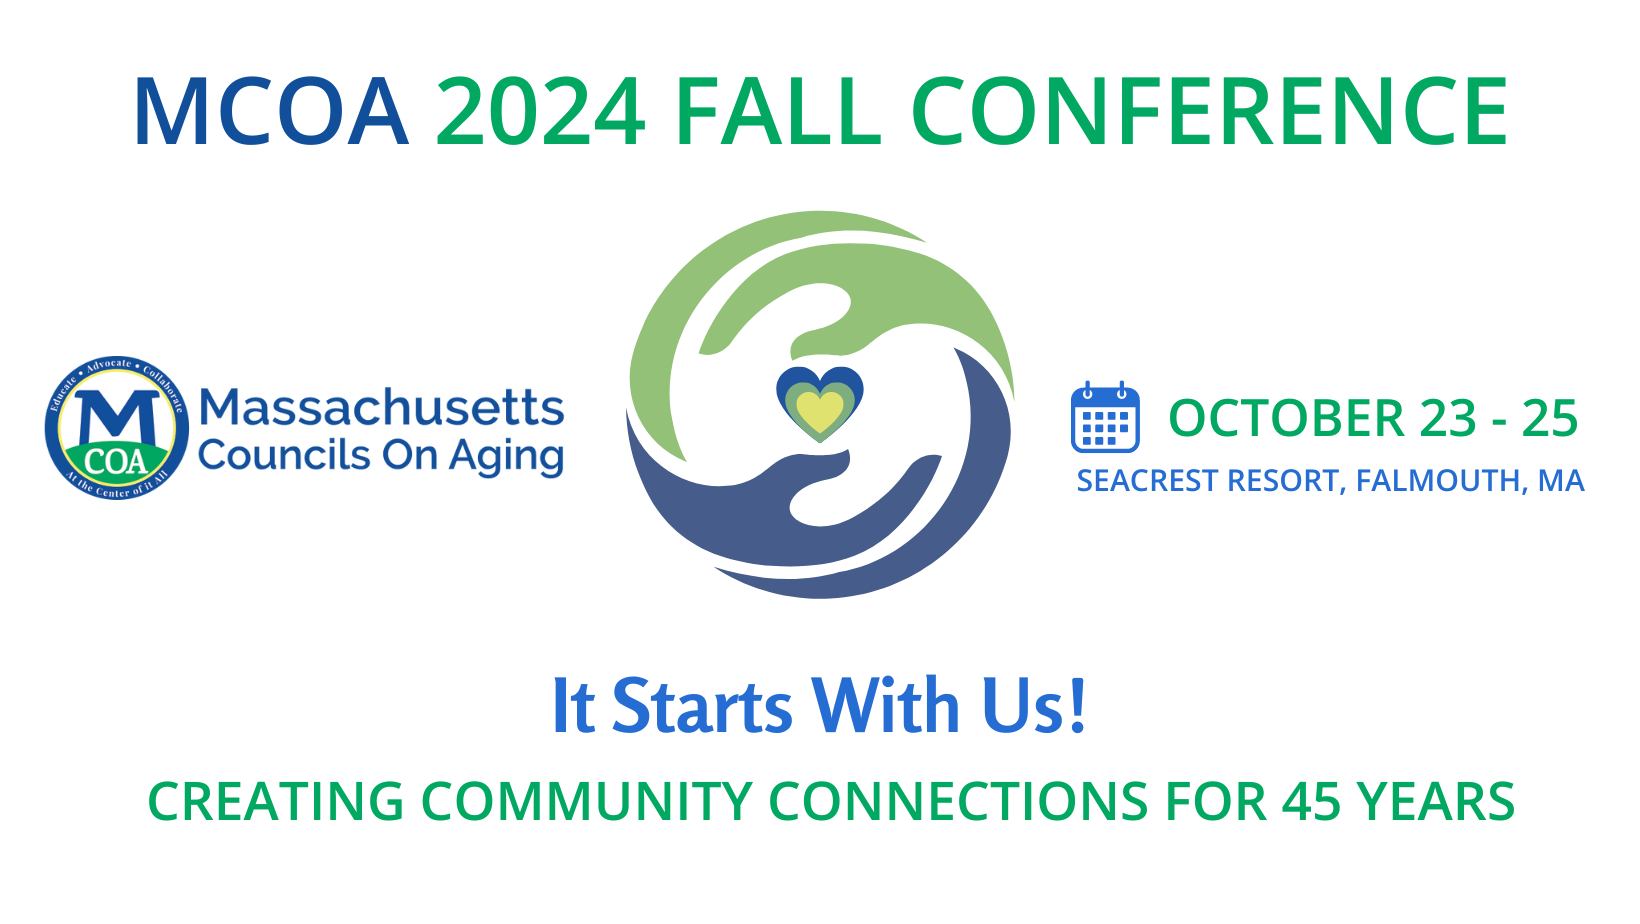 Fall Conference logo and dates